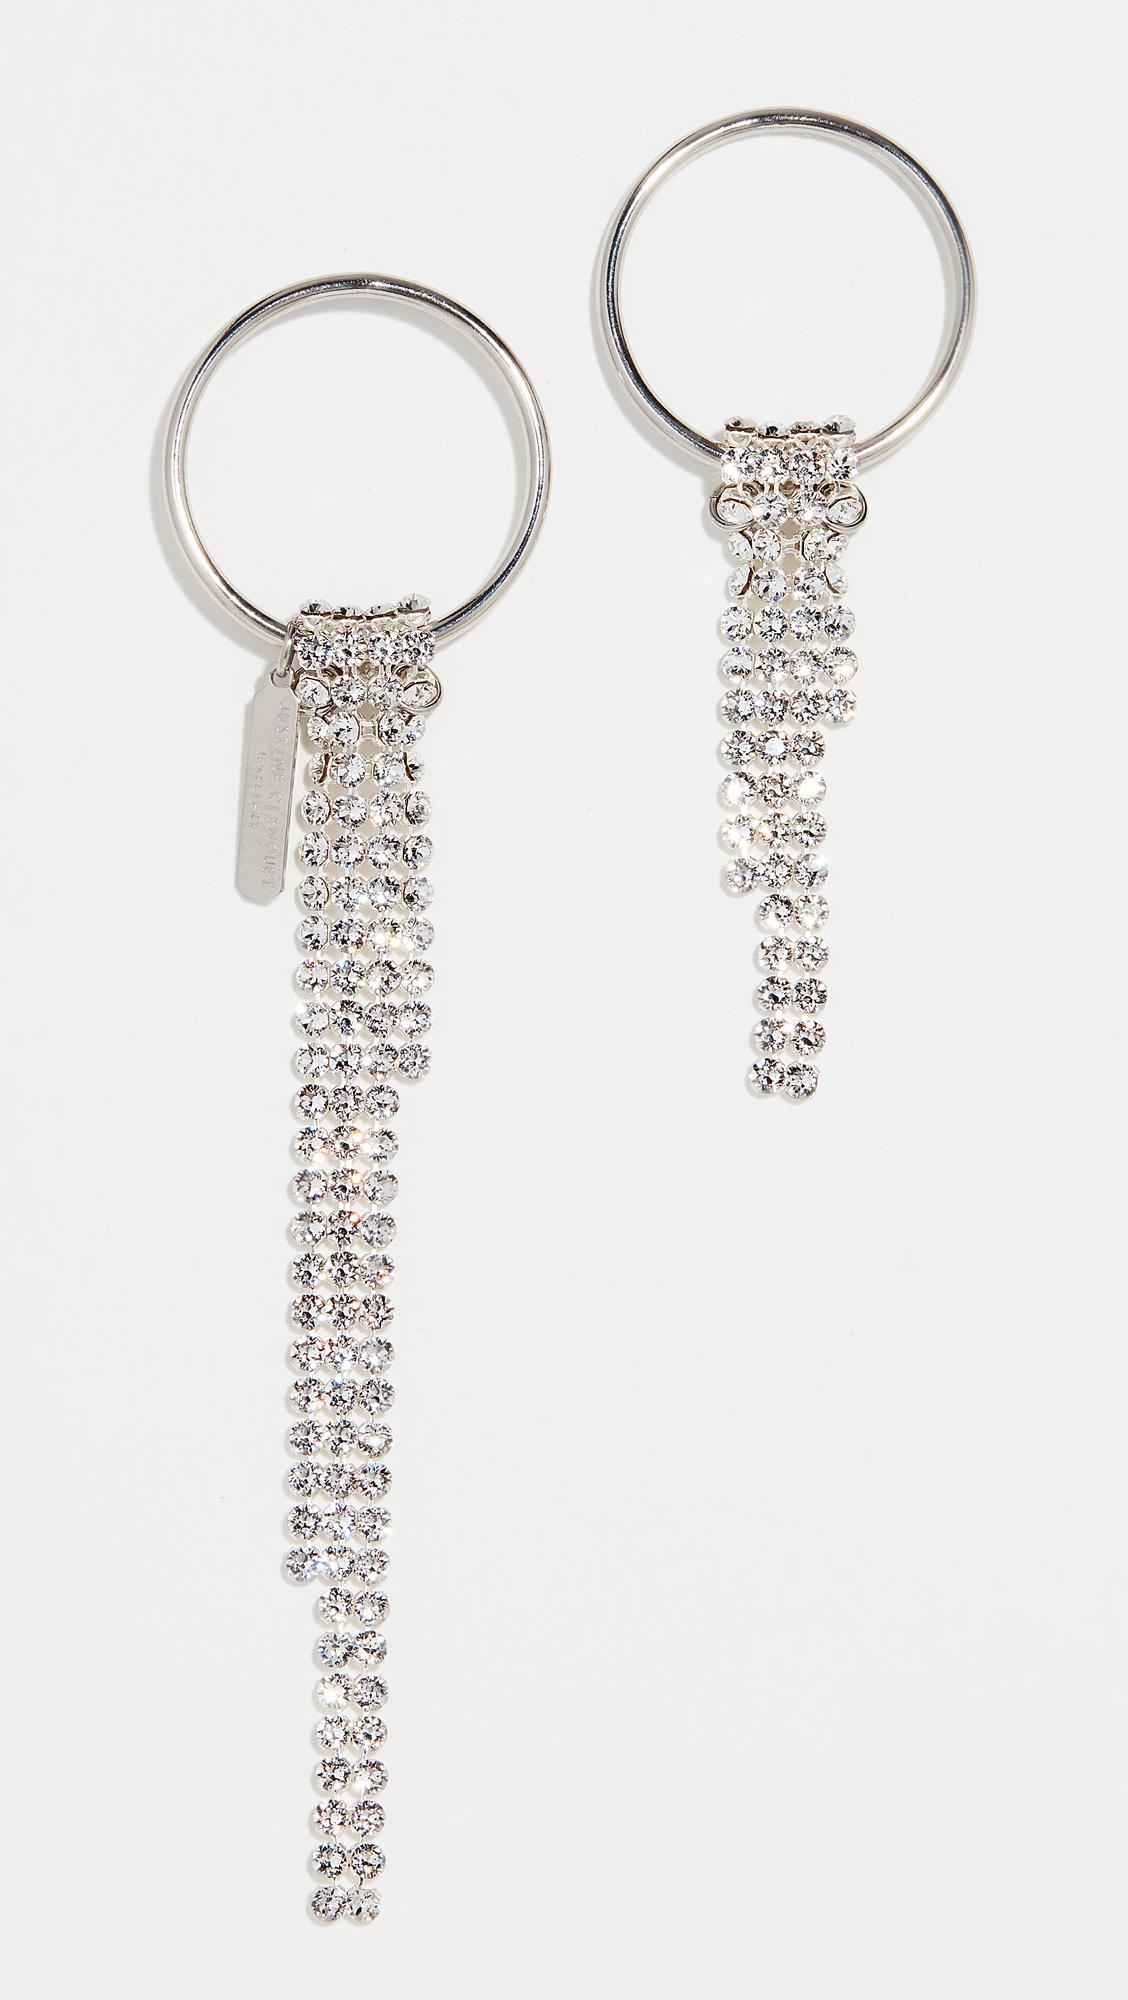 Lyst - Justine Clenquet Ronnie Earrings in Metallic